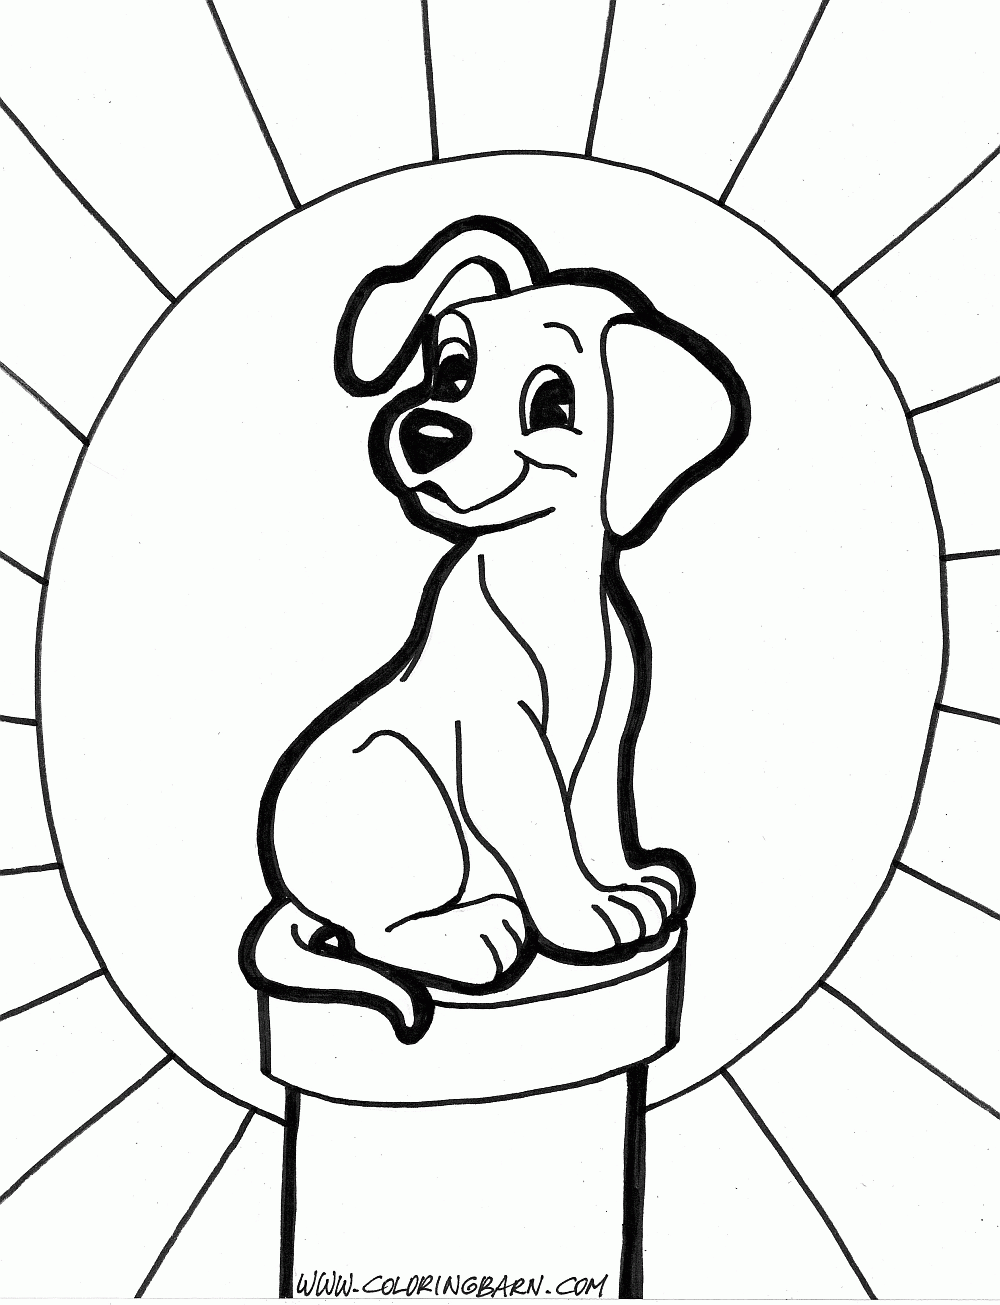 dogs to color 2017 10 01 coloring pages galleries color to dogs 